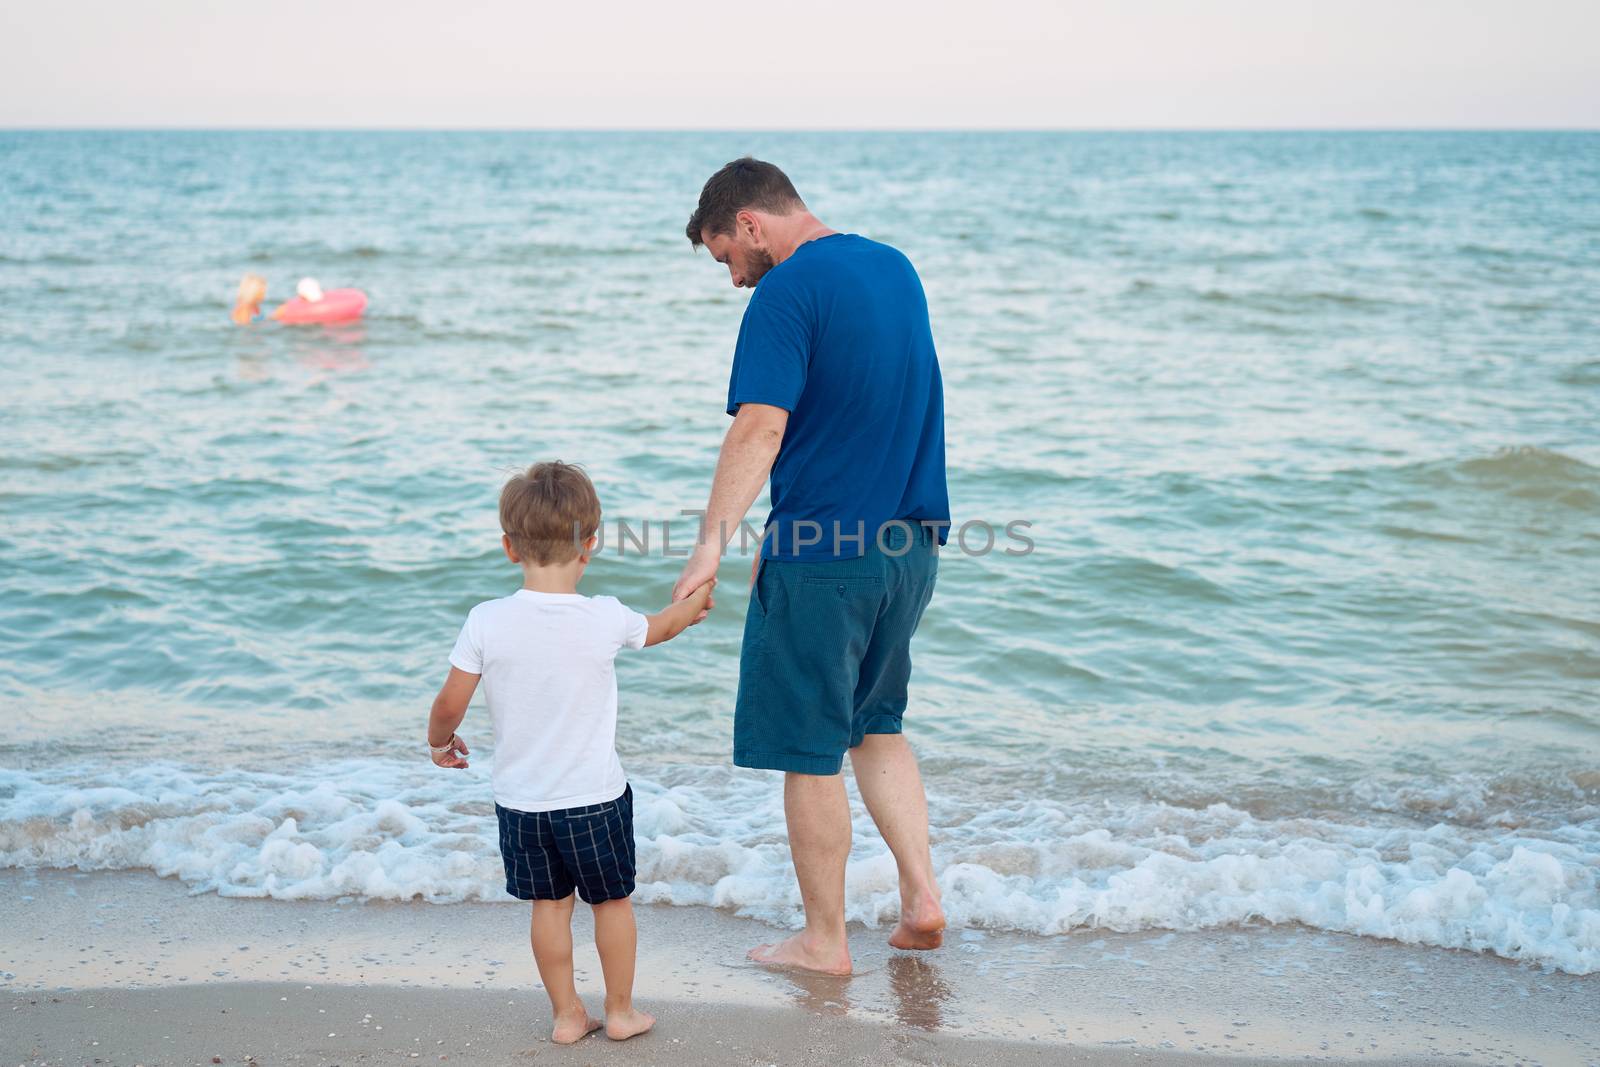 Father son spending time together sea vacation Young dad child little boy walking beach by andreonegin